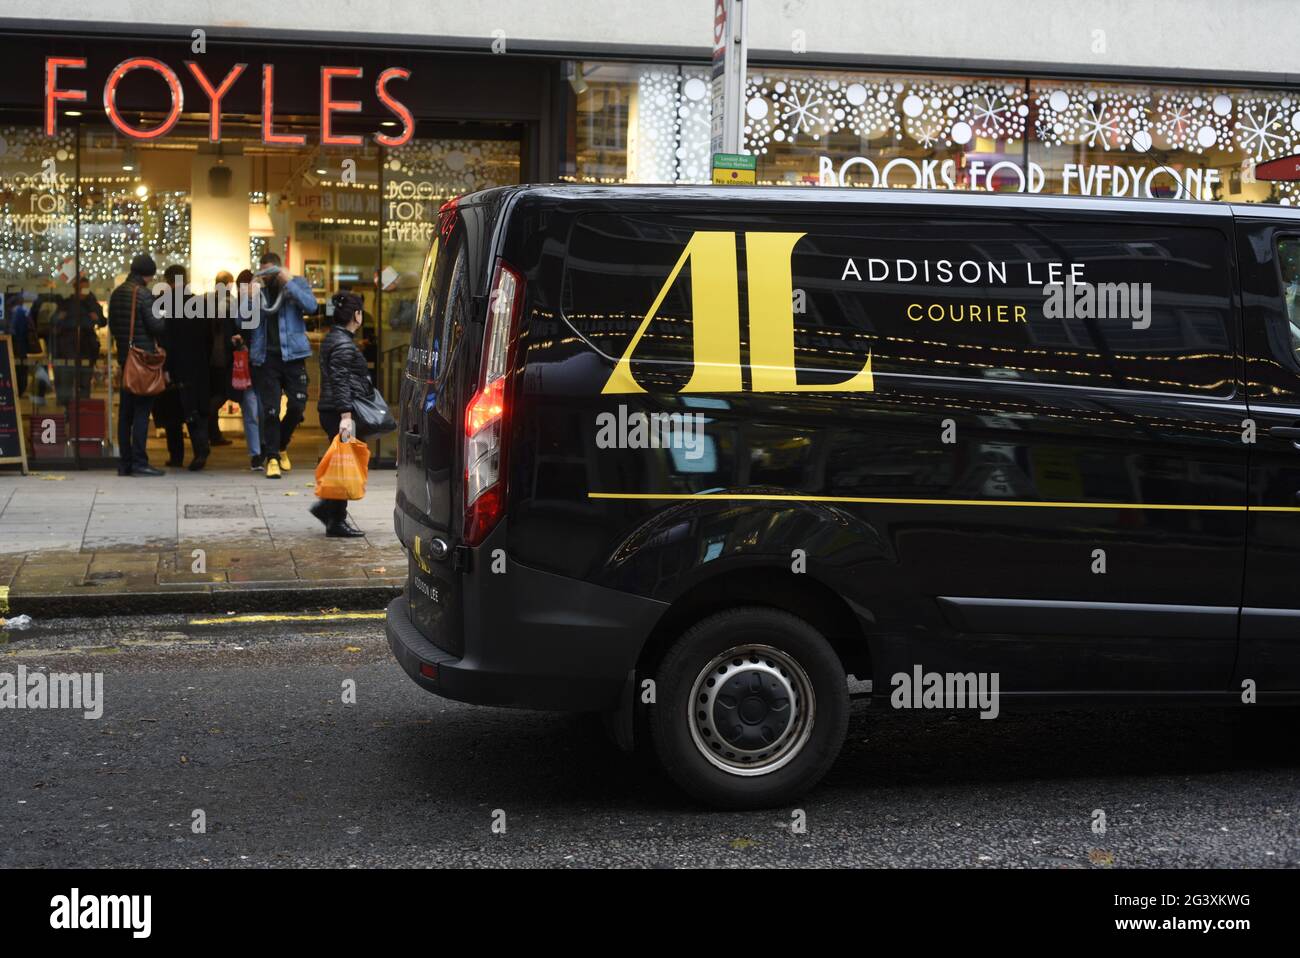 An Addison Lee courier van outside Foyles bookshop on Charing Cross Road, London Stock Photo